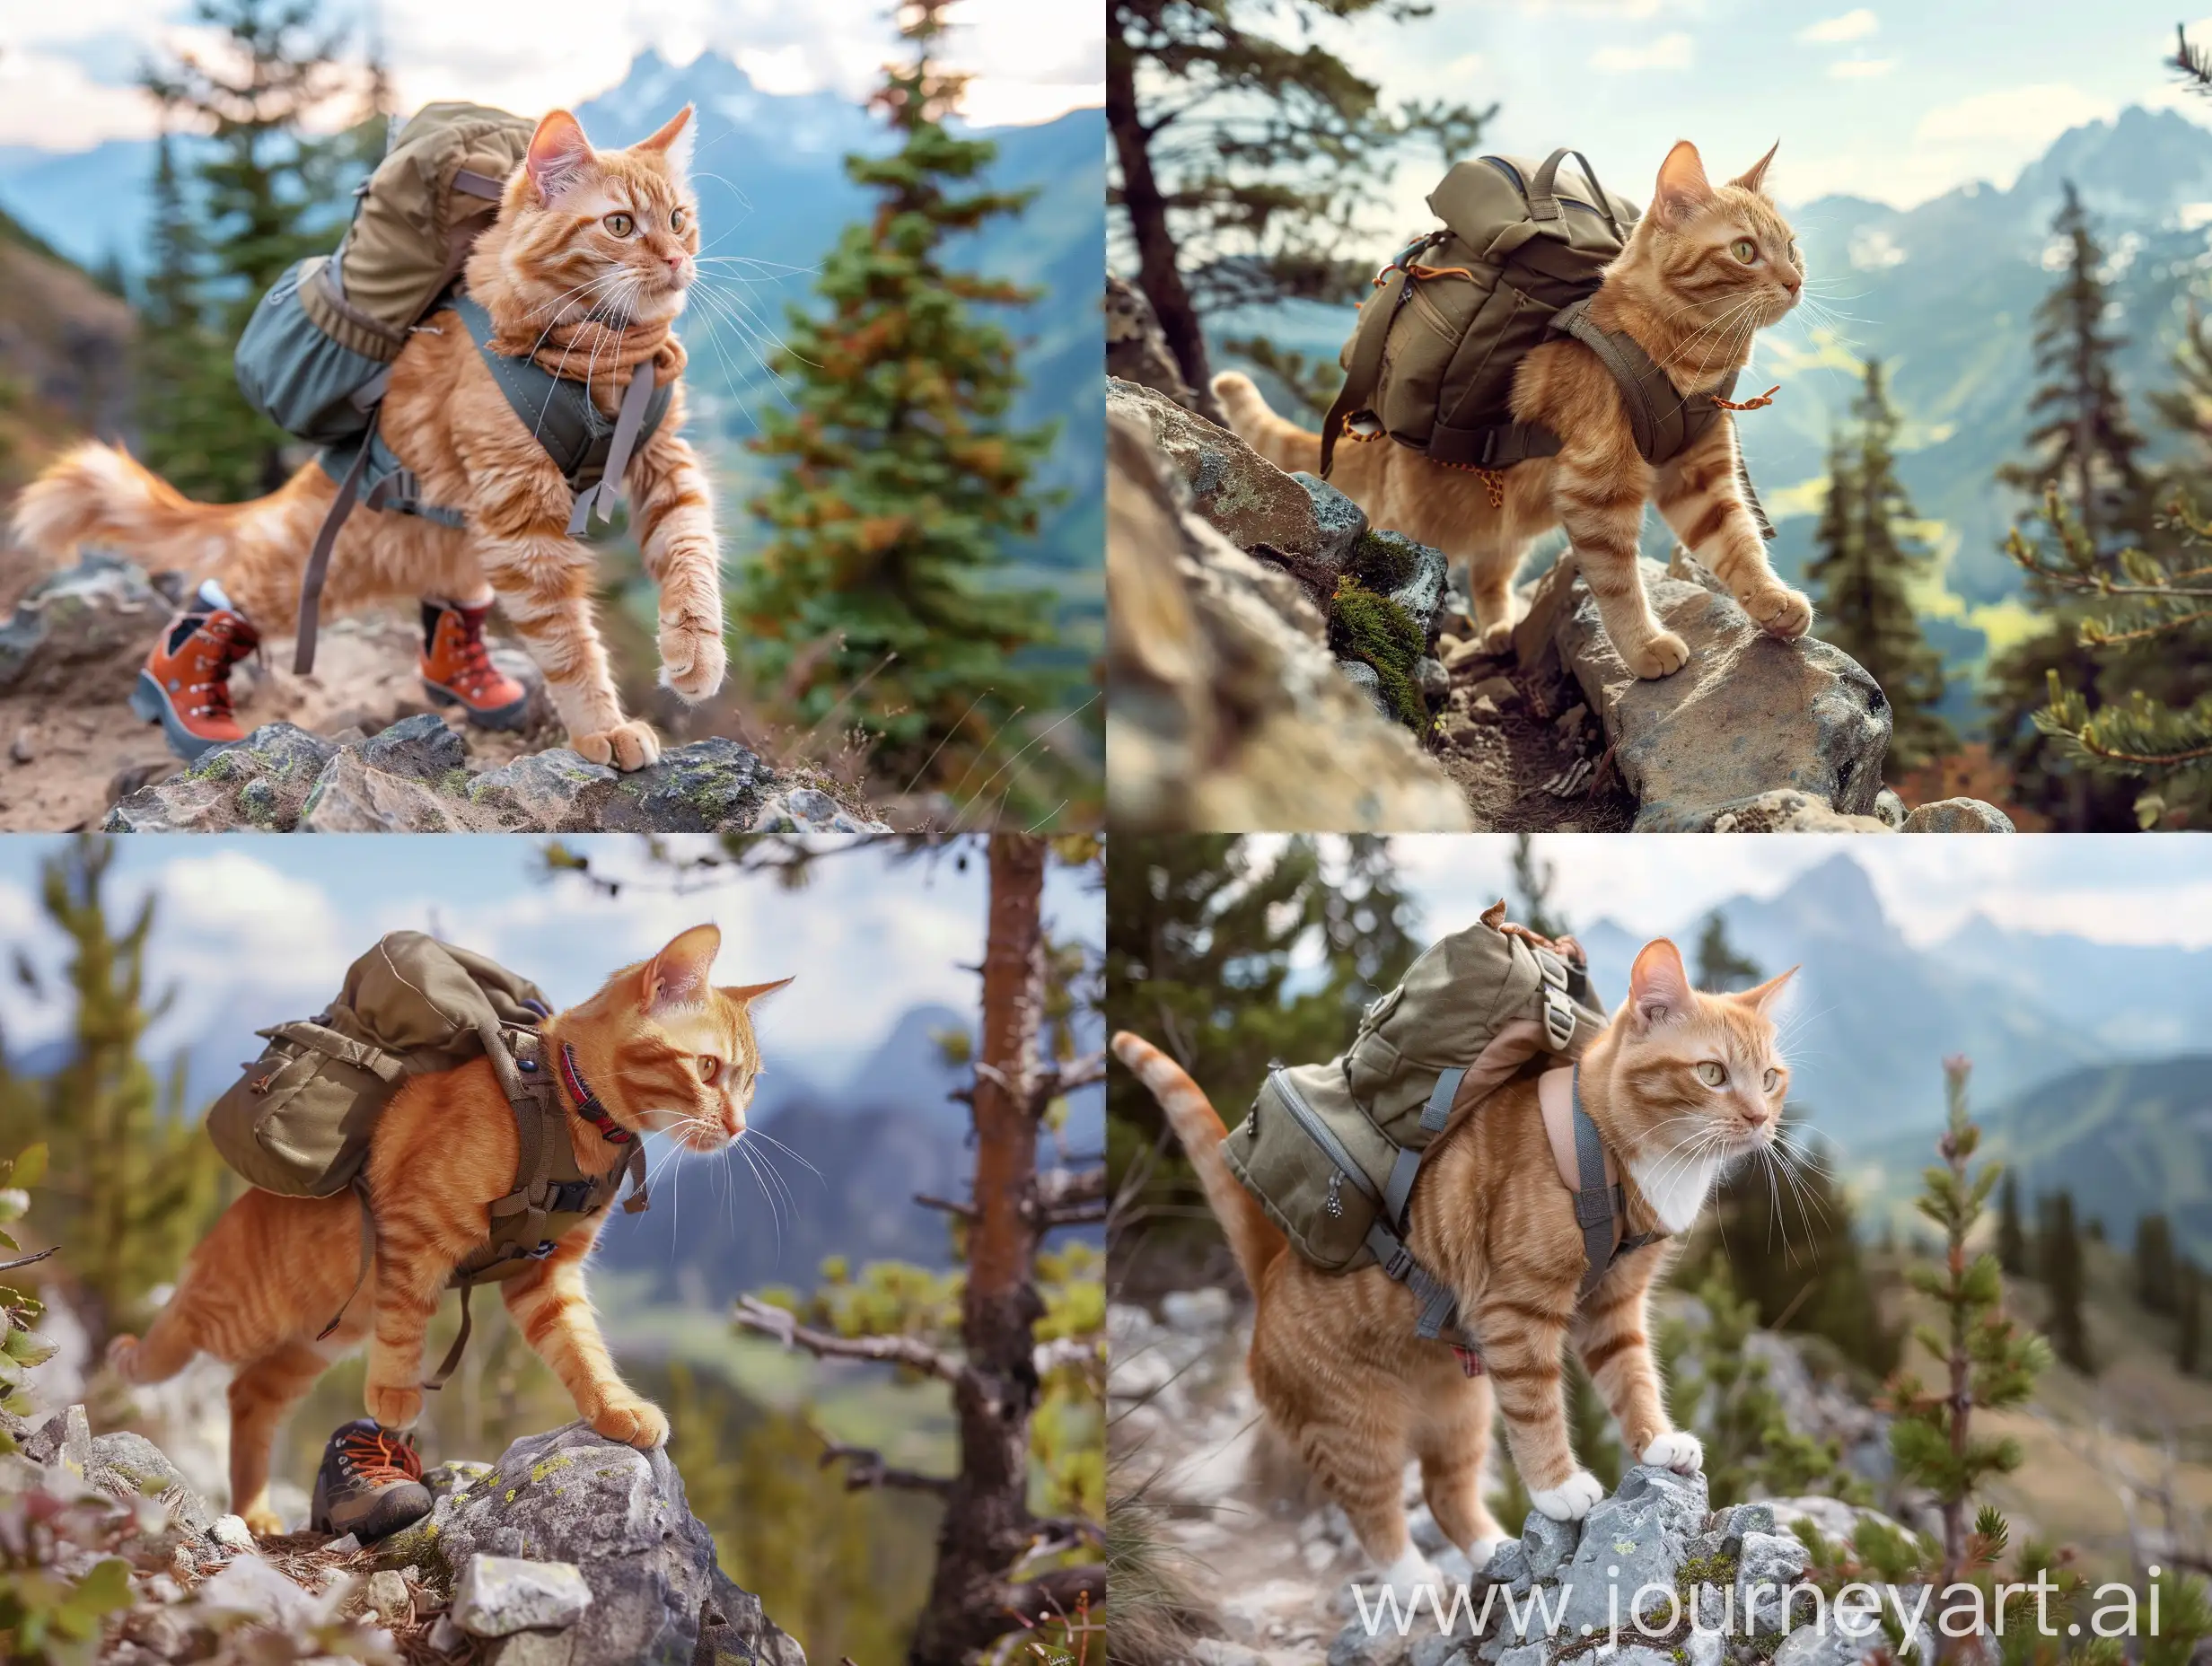 The orange tabby cat climbs a scenic mountain trail, equipped with a tiny backpack and hiking boots. It pauses at a lookout point to take in the breathtaking view. The surrounding nature, with trees and distant peaks, highlights the beauty of the outdoors. pet anthropomorphism, long shot, photography, Canon EOS5D Mark IV, delicate clothing, soft natural light